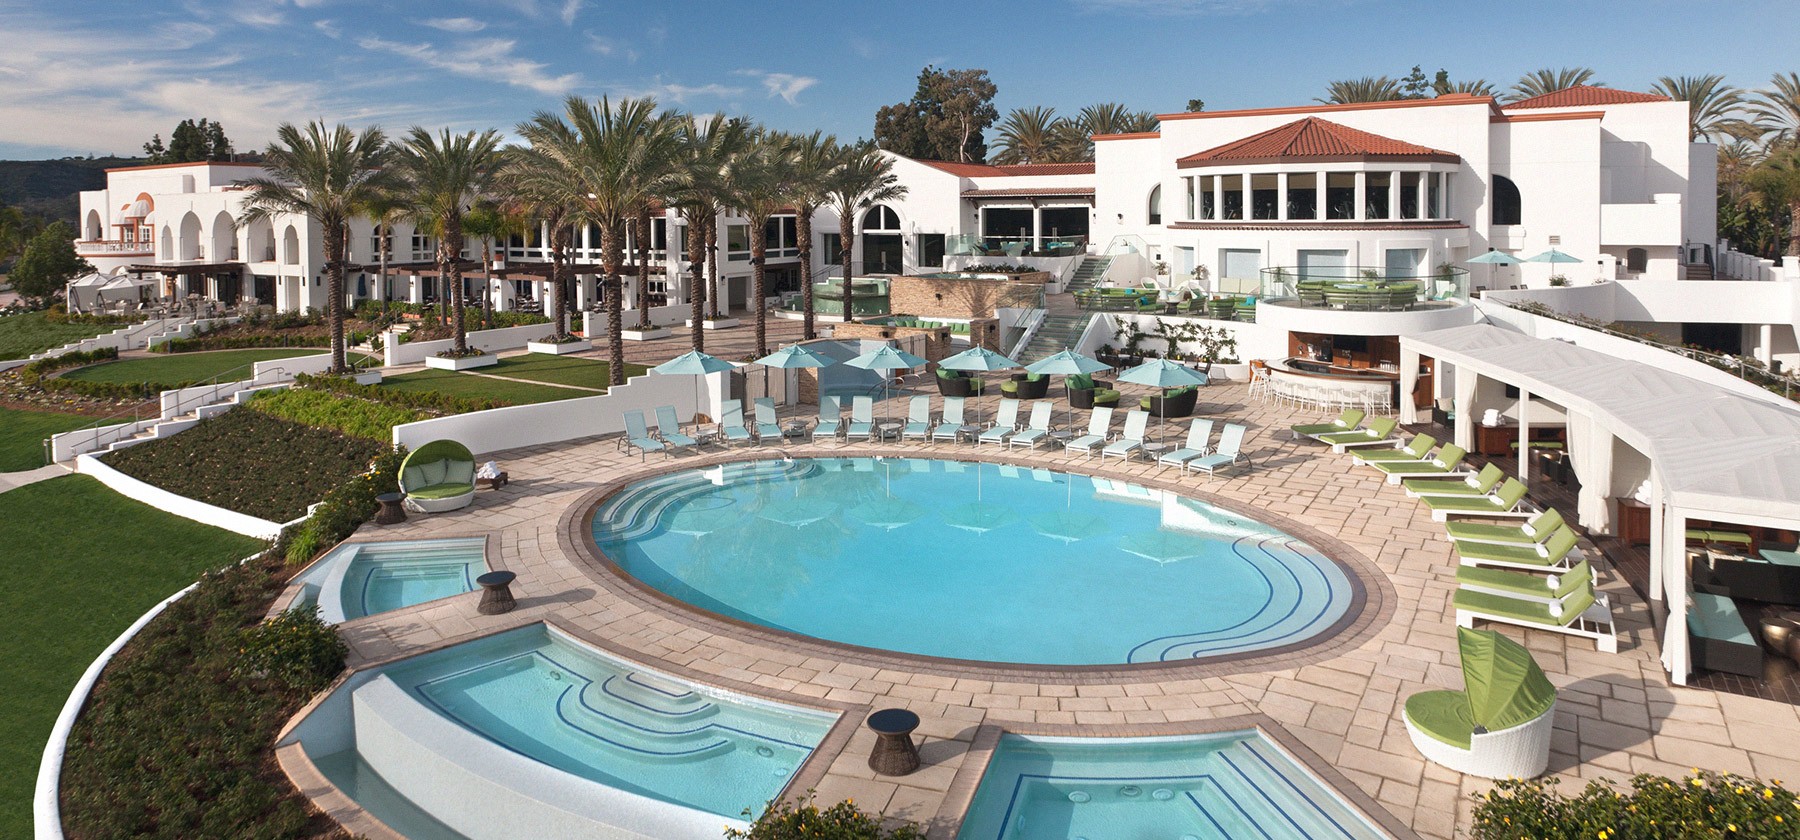 weight loss resort in San Diego with outdoor pool and spa